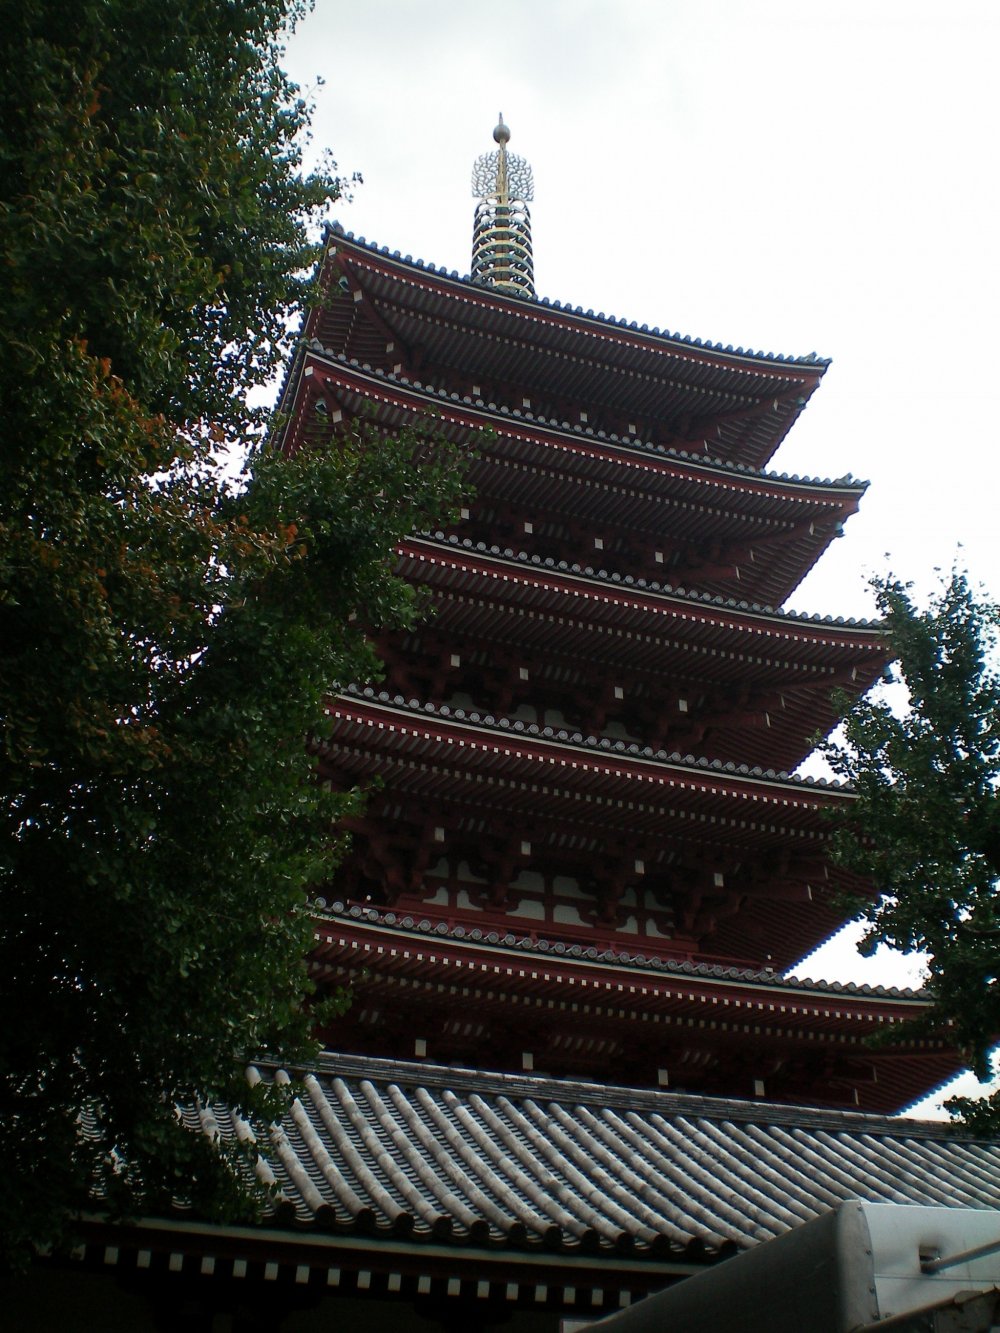 Five-story Pagoda, side view